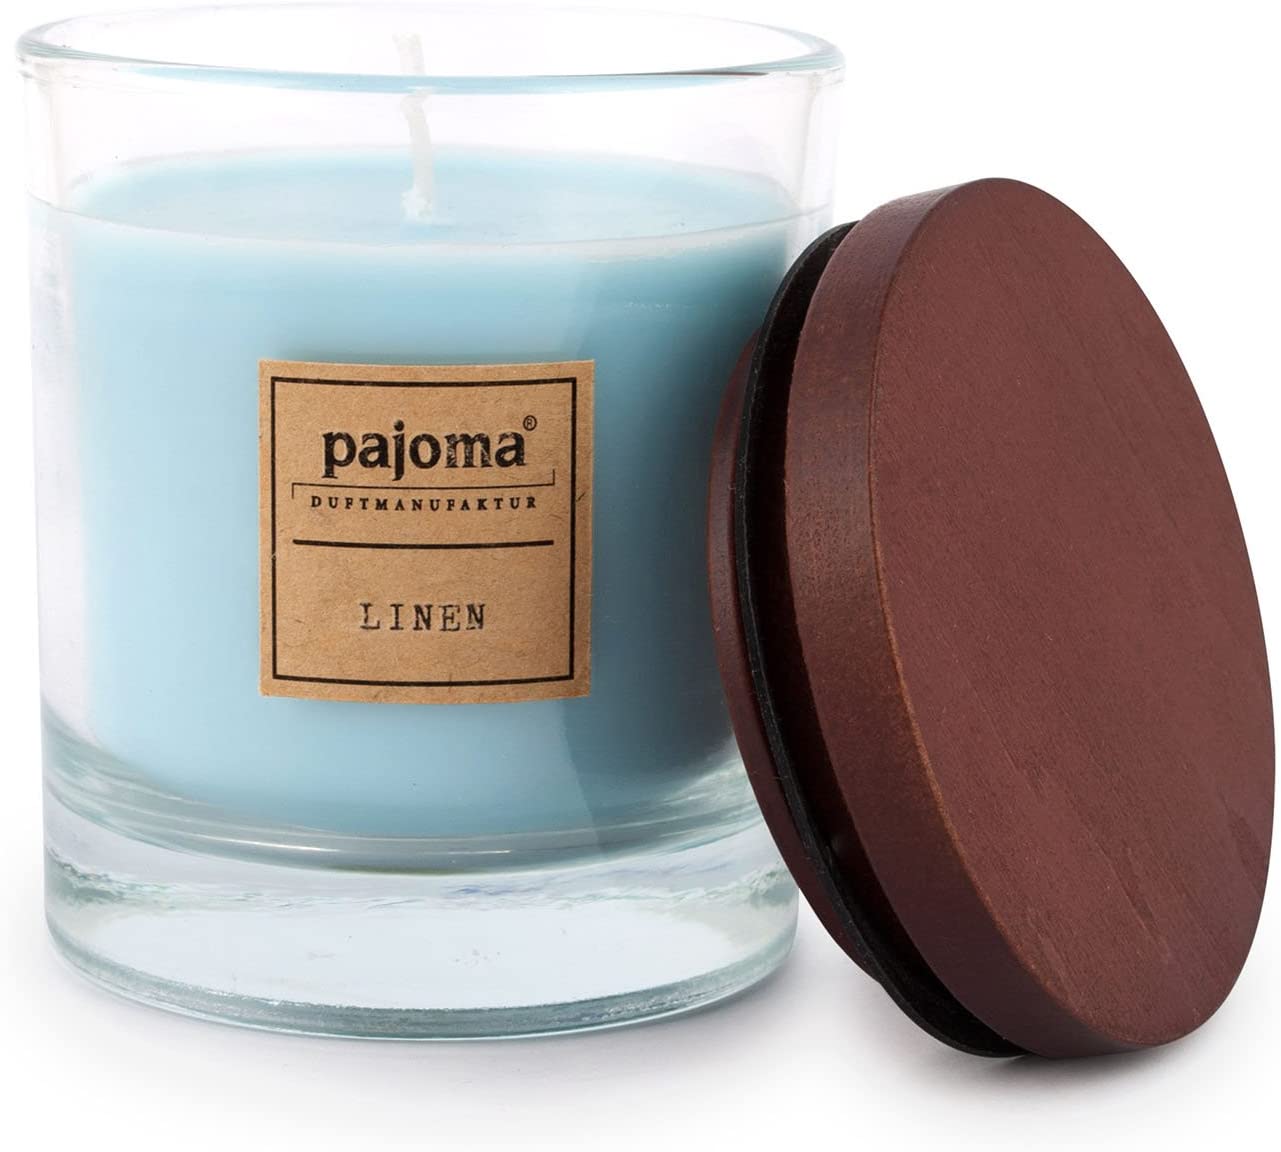 Pajoma 16843 Scented Candle Linen – 180G Jar With Wooden Lid New Premium Ed